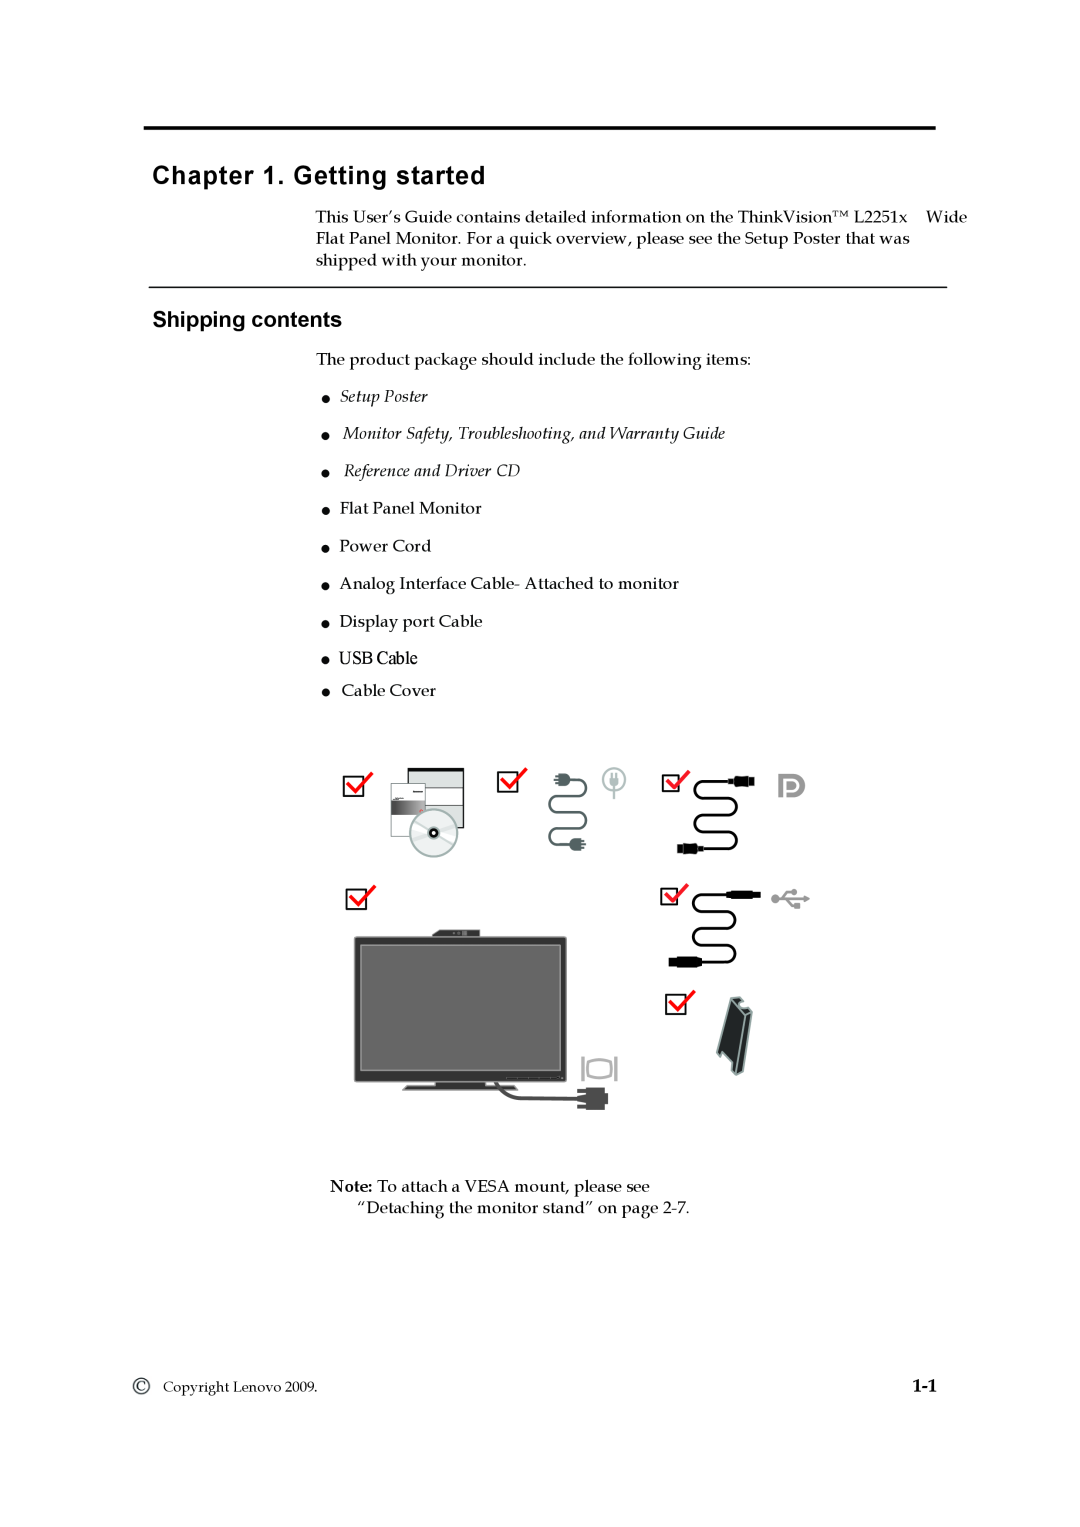 Lenovo 2578HB6 manual Getting started, Shipping contents, Setup Poster Monitor Safety, Troubleshooting, and Warranty Guide 